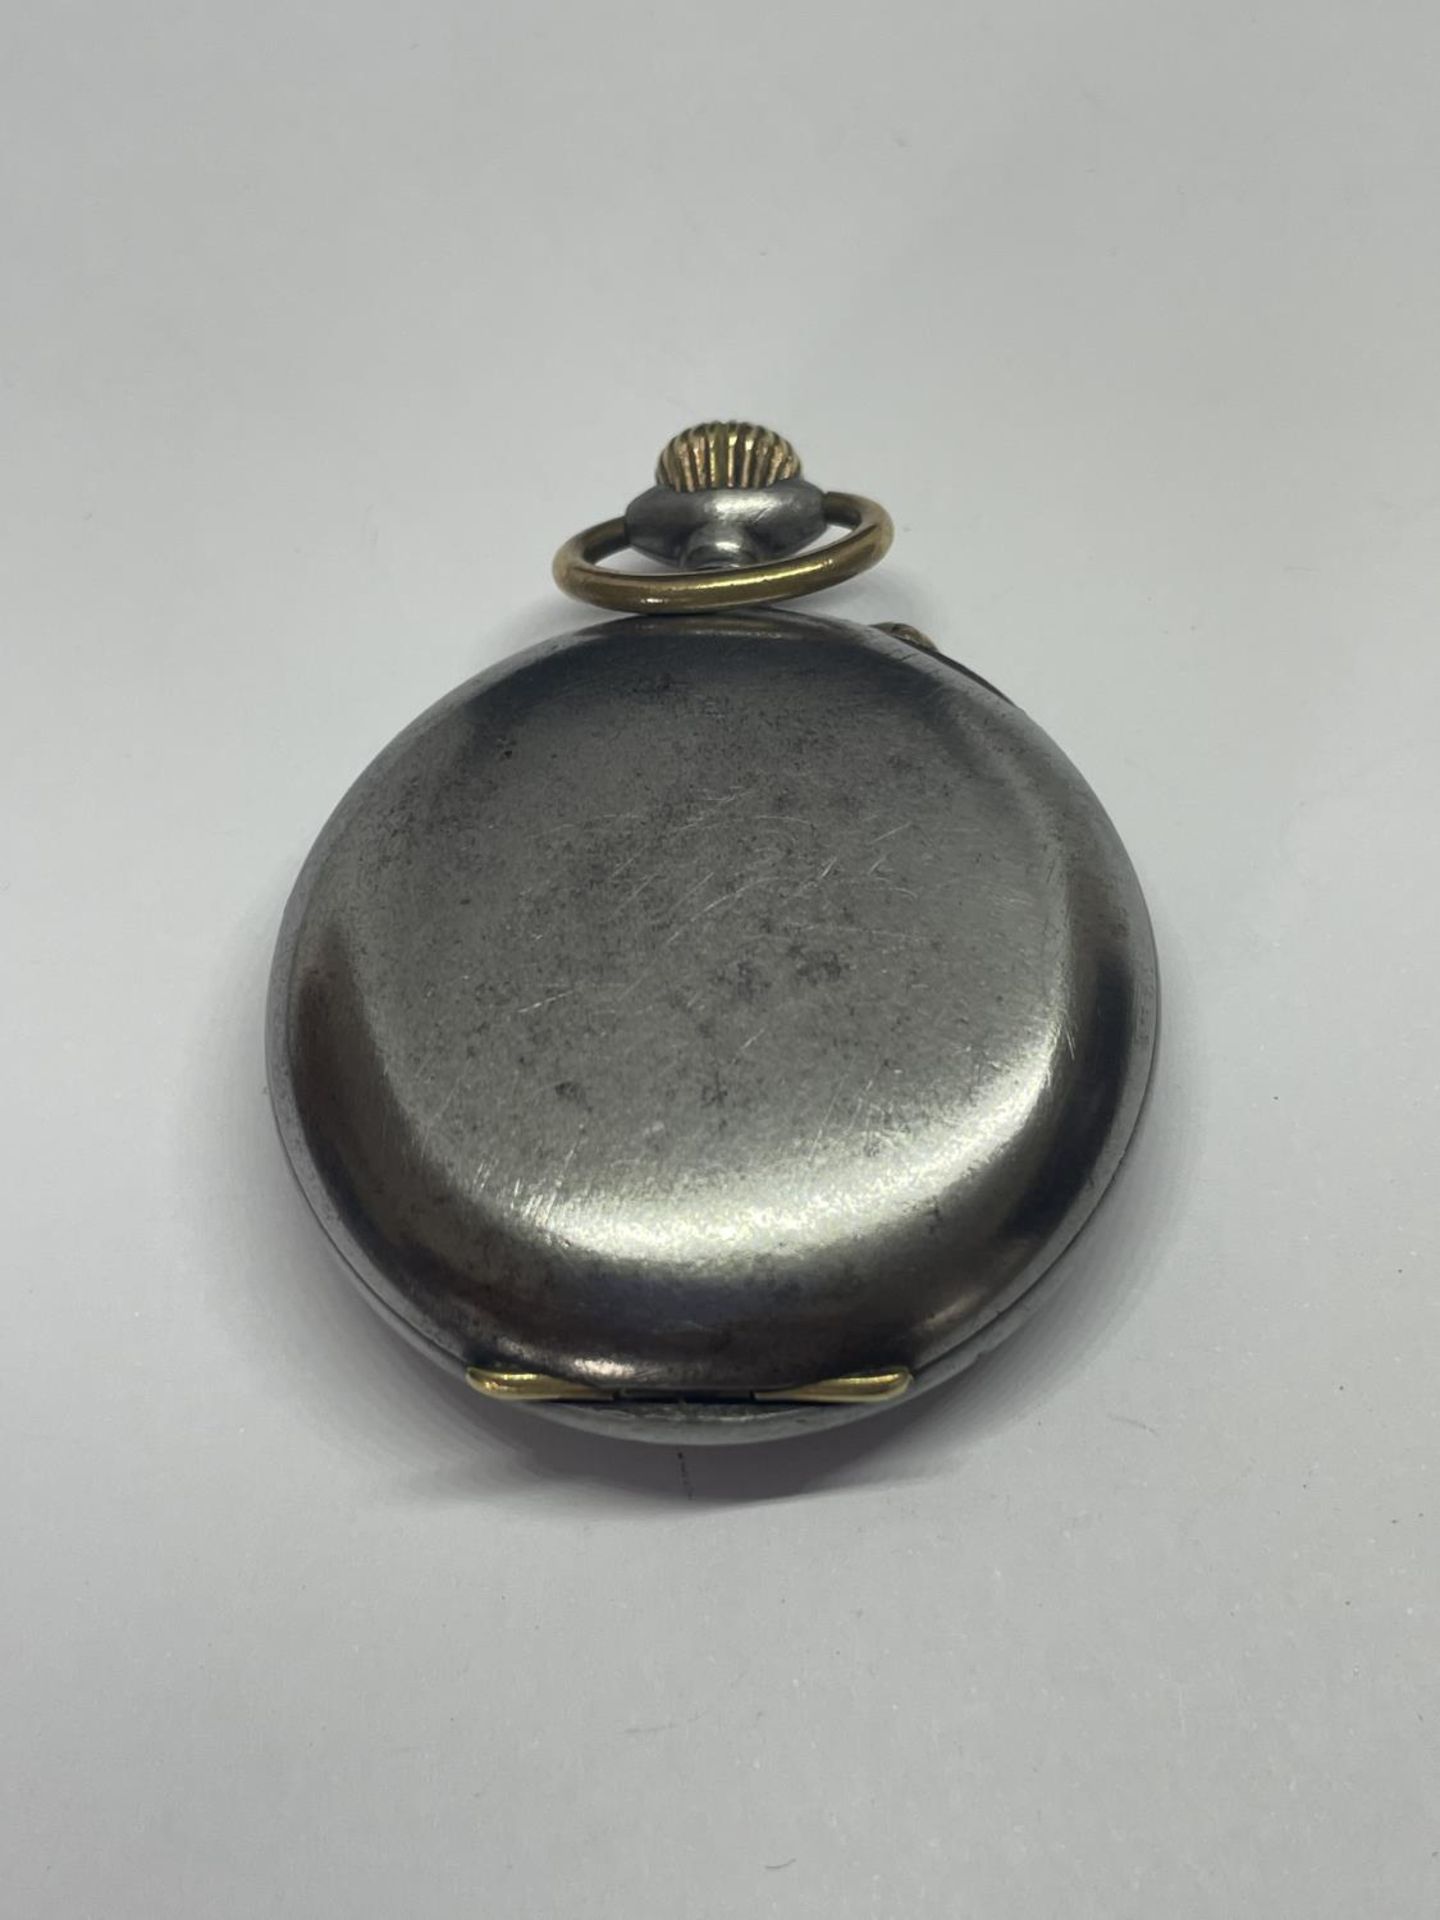 A POCKET WATCH WITH VISUAL ESCAPEMENT - Image 4 of 4